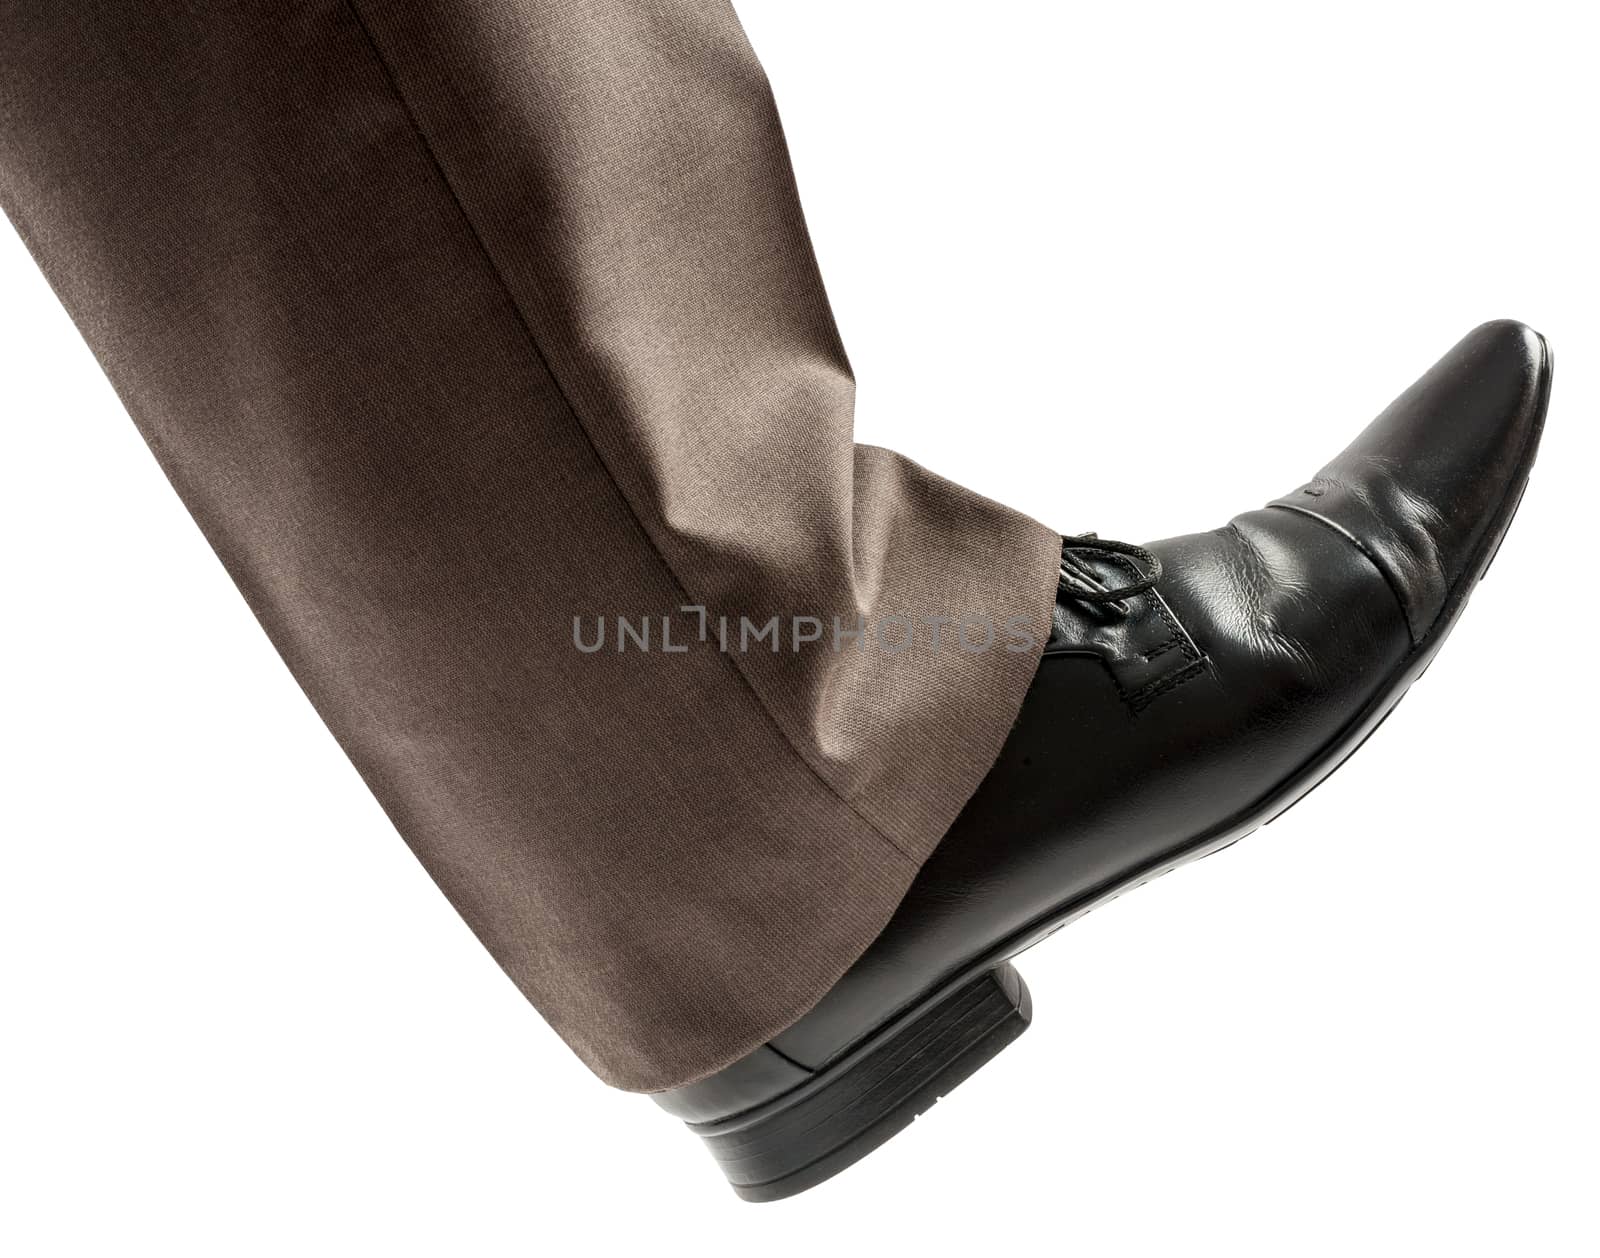 Feet of man in black shoes isolated on white background